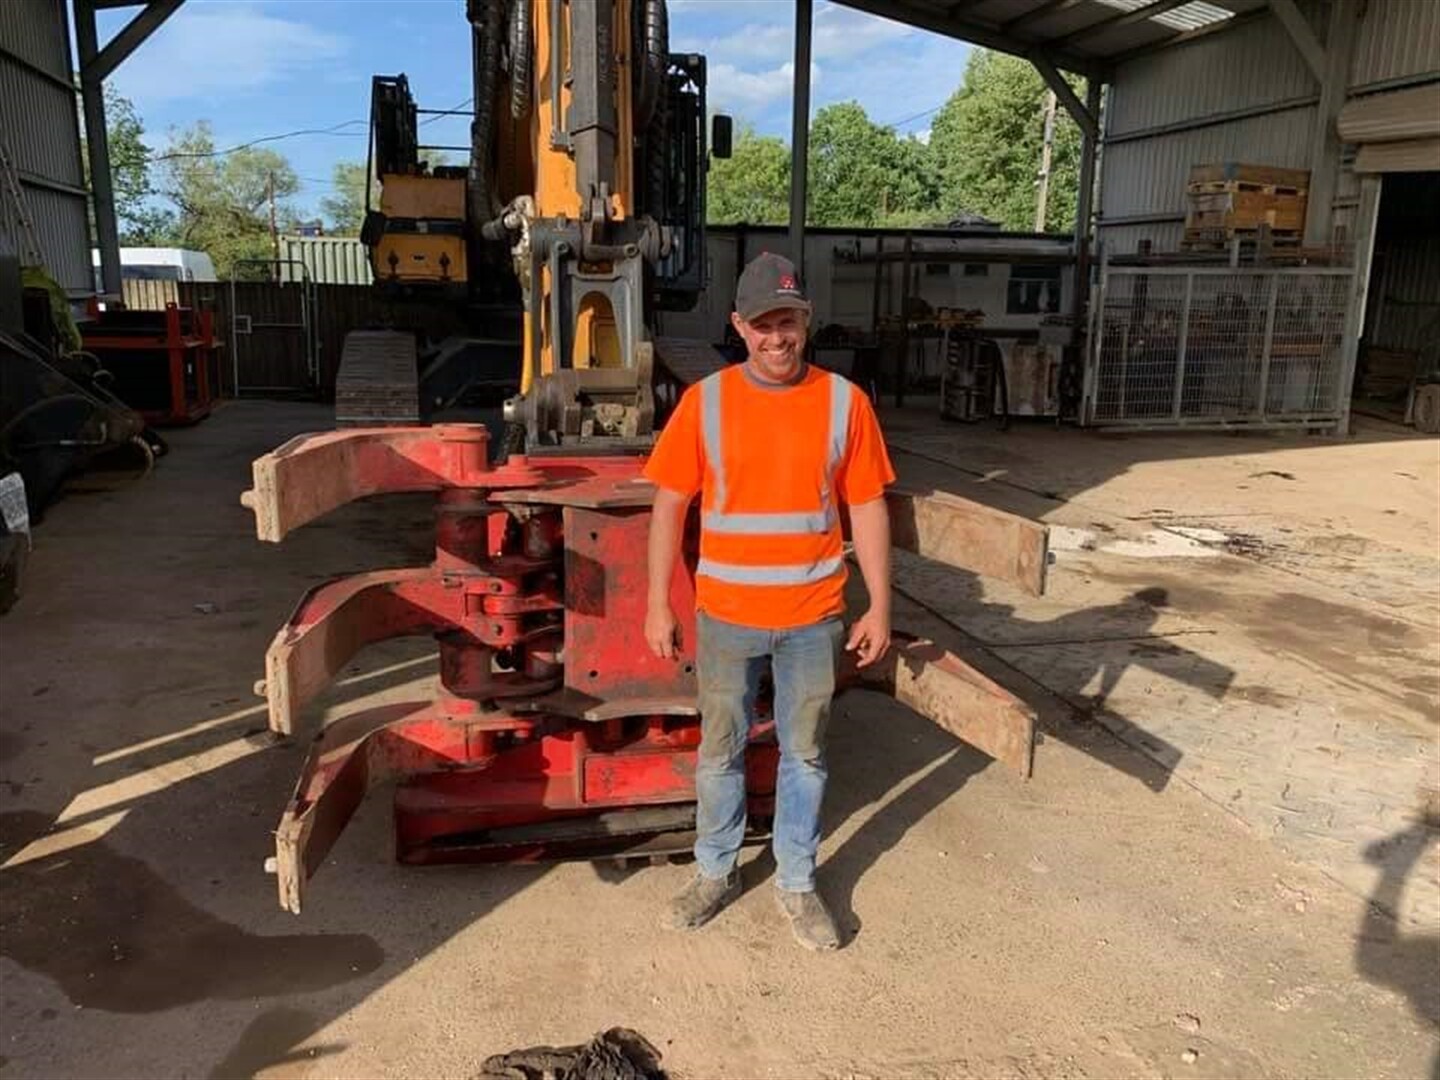 Multi-Skilled machine operator moves east to follow his dreams